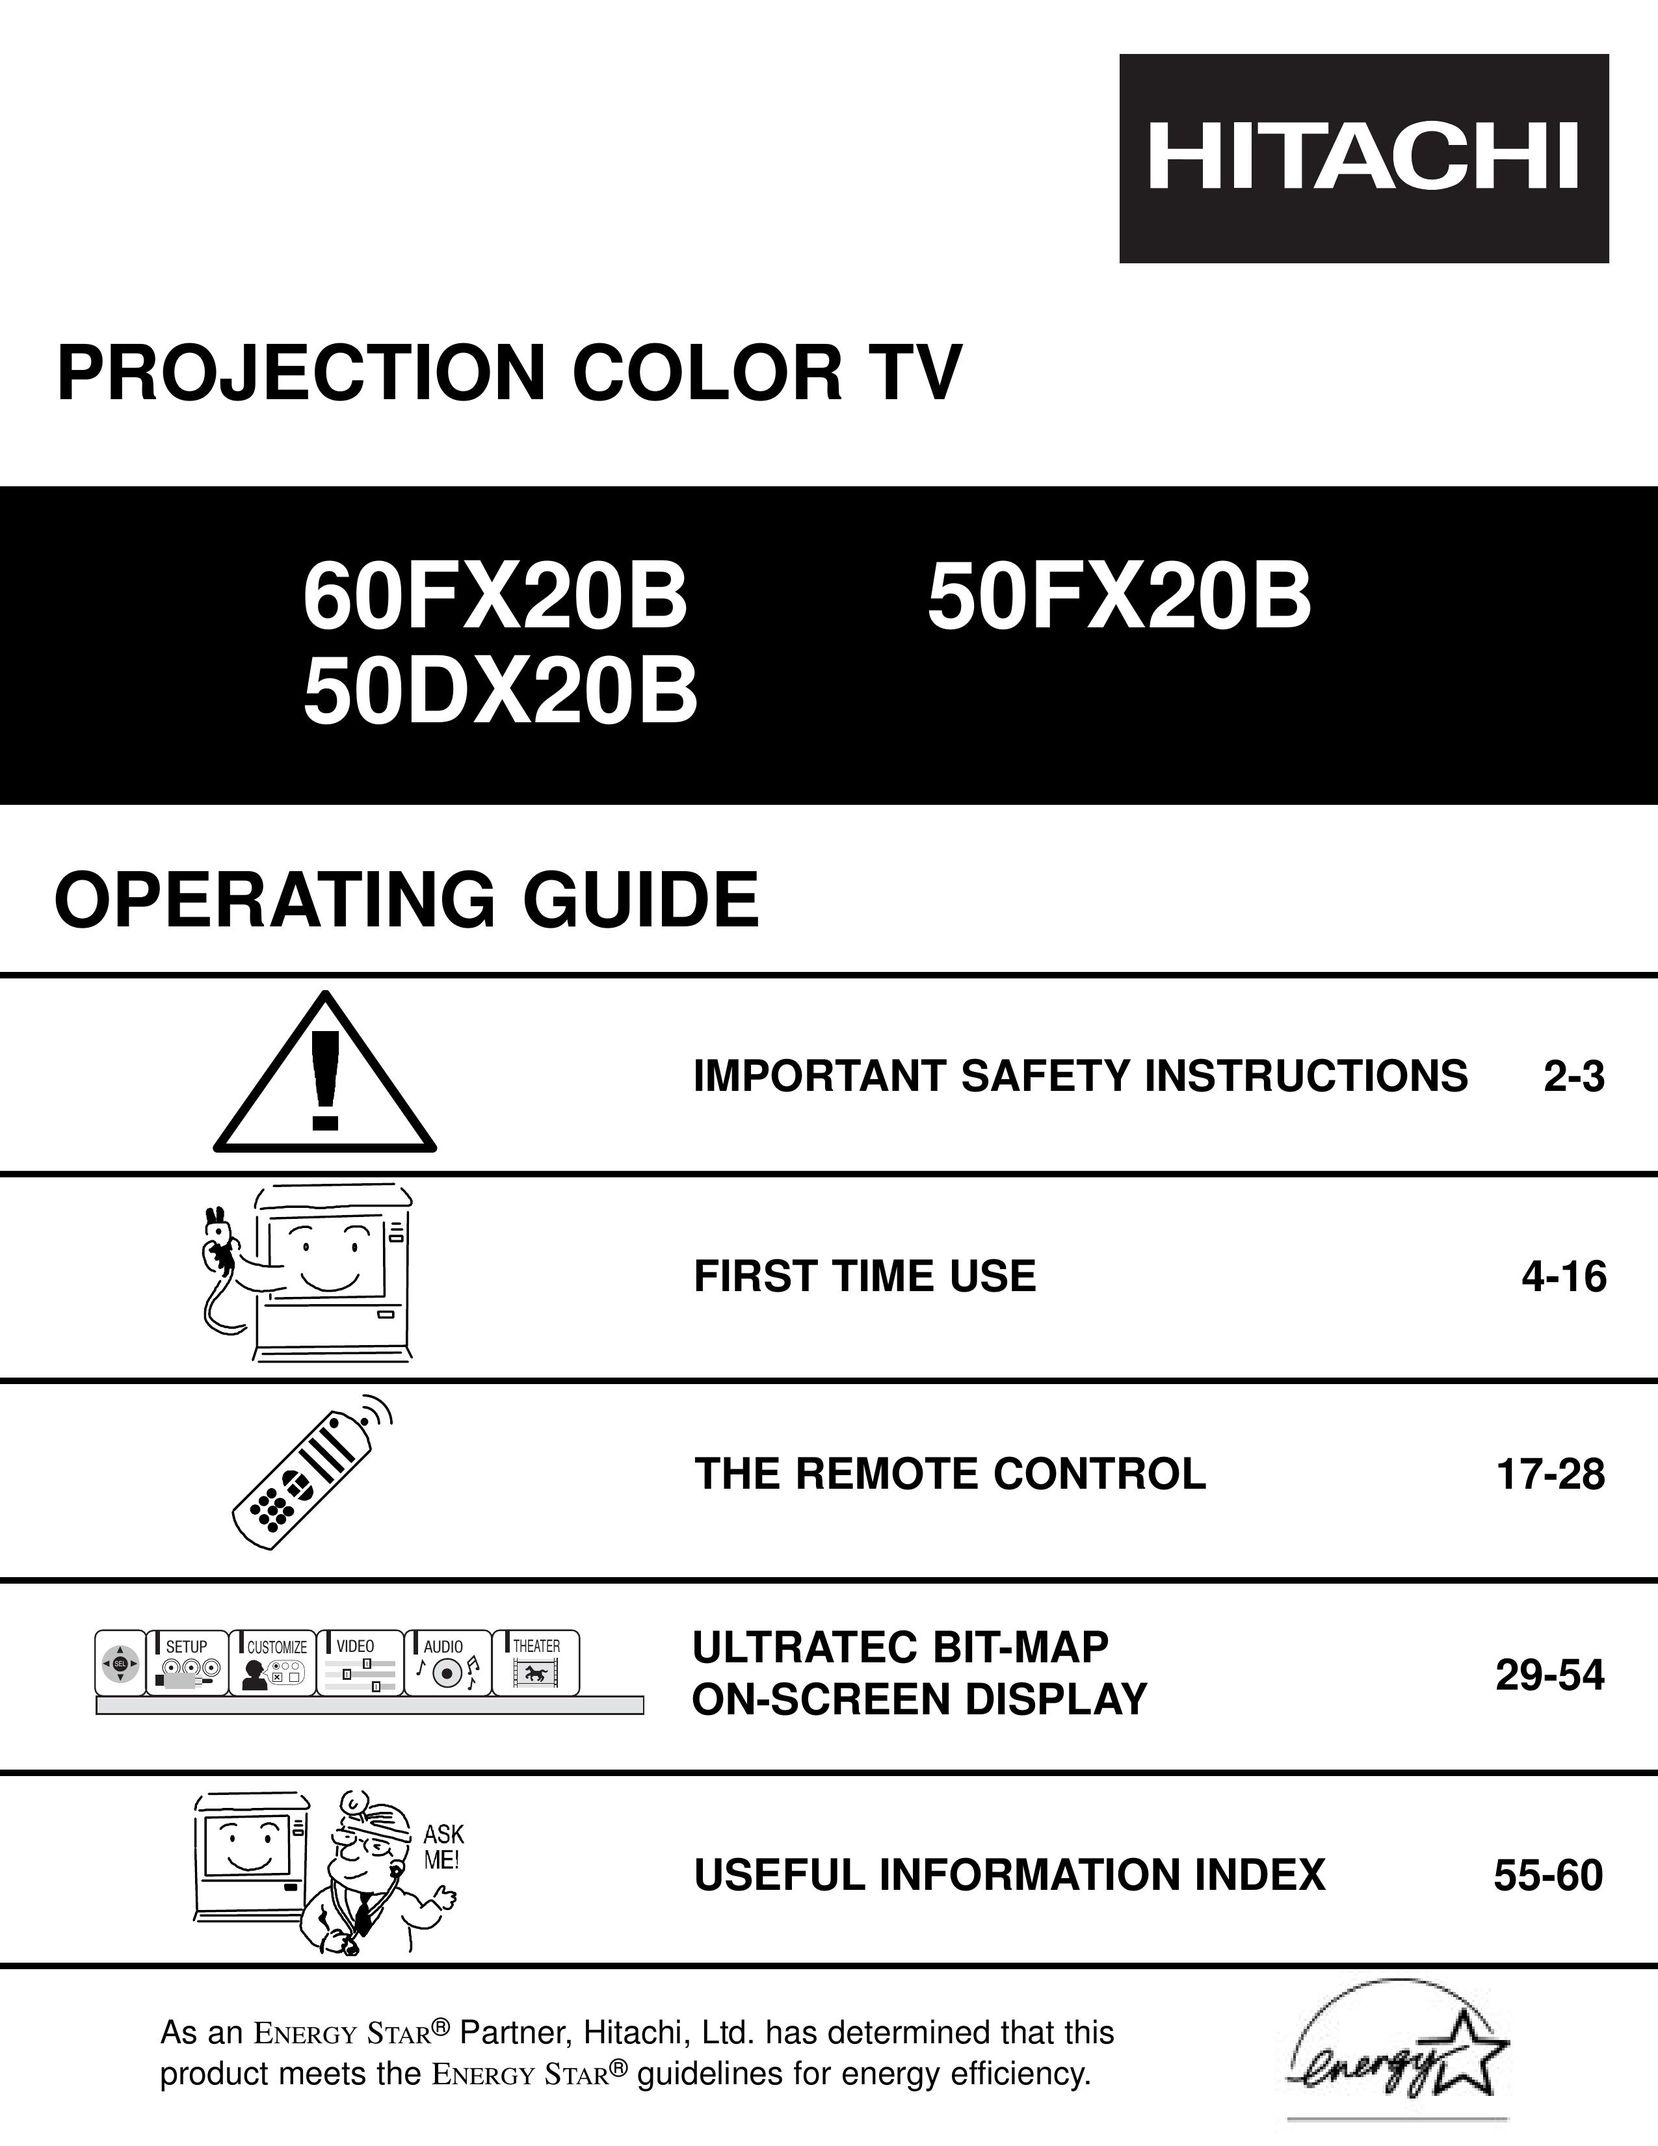 Ultratec 50FX20B Projection Television User Manual